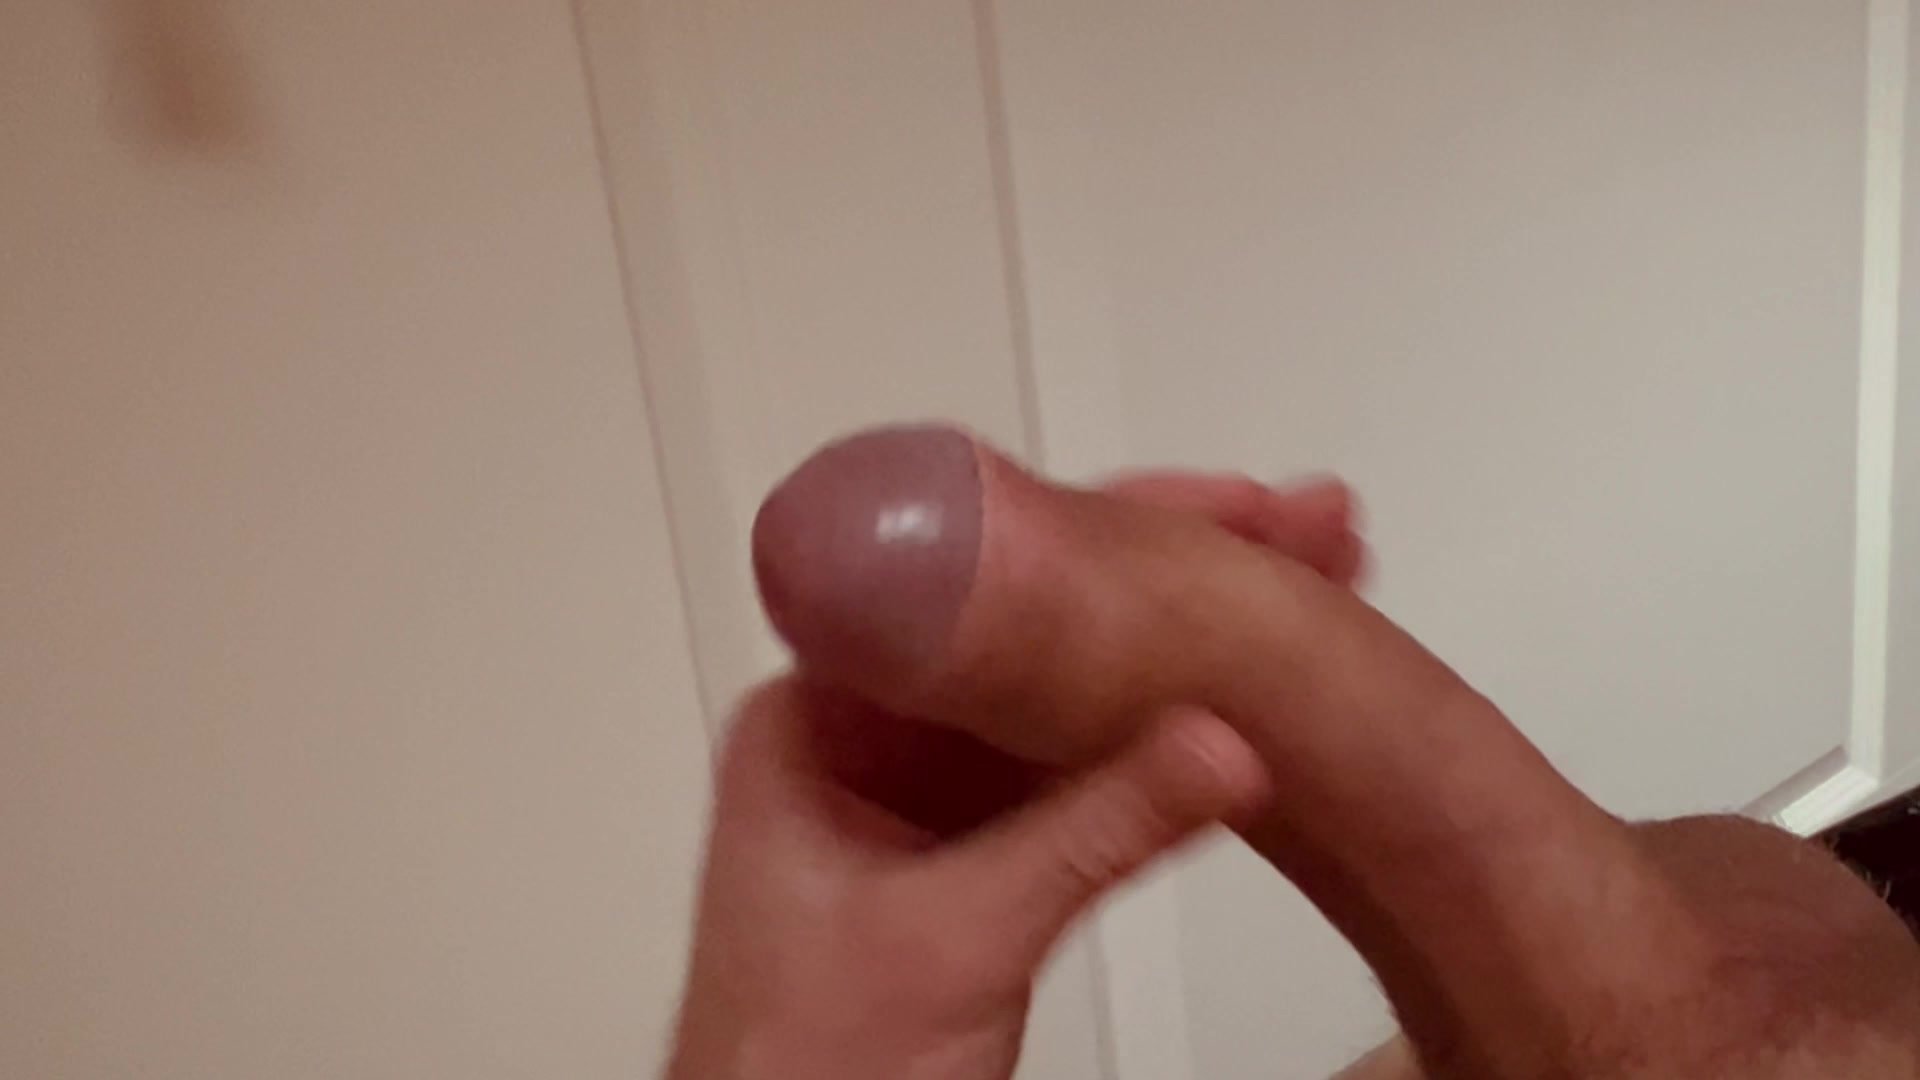 Who wants to smell and suck my smegma dick?